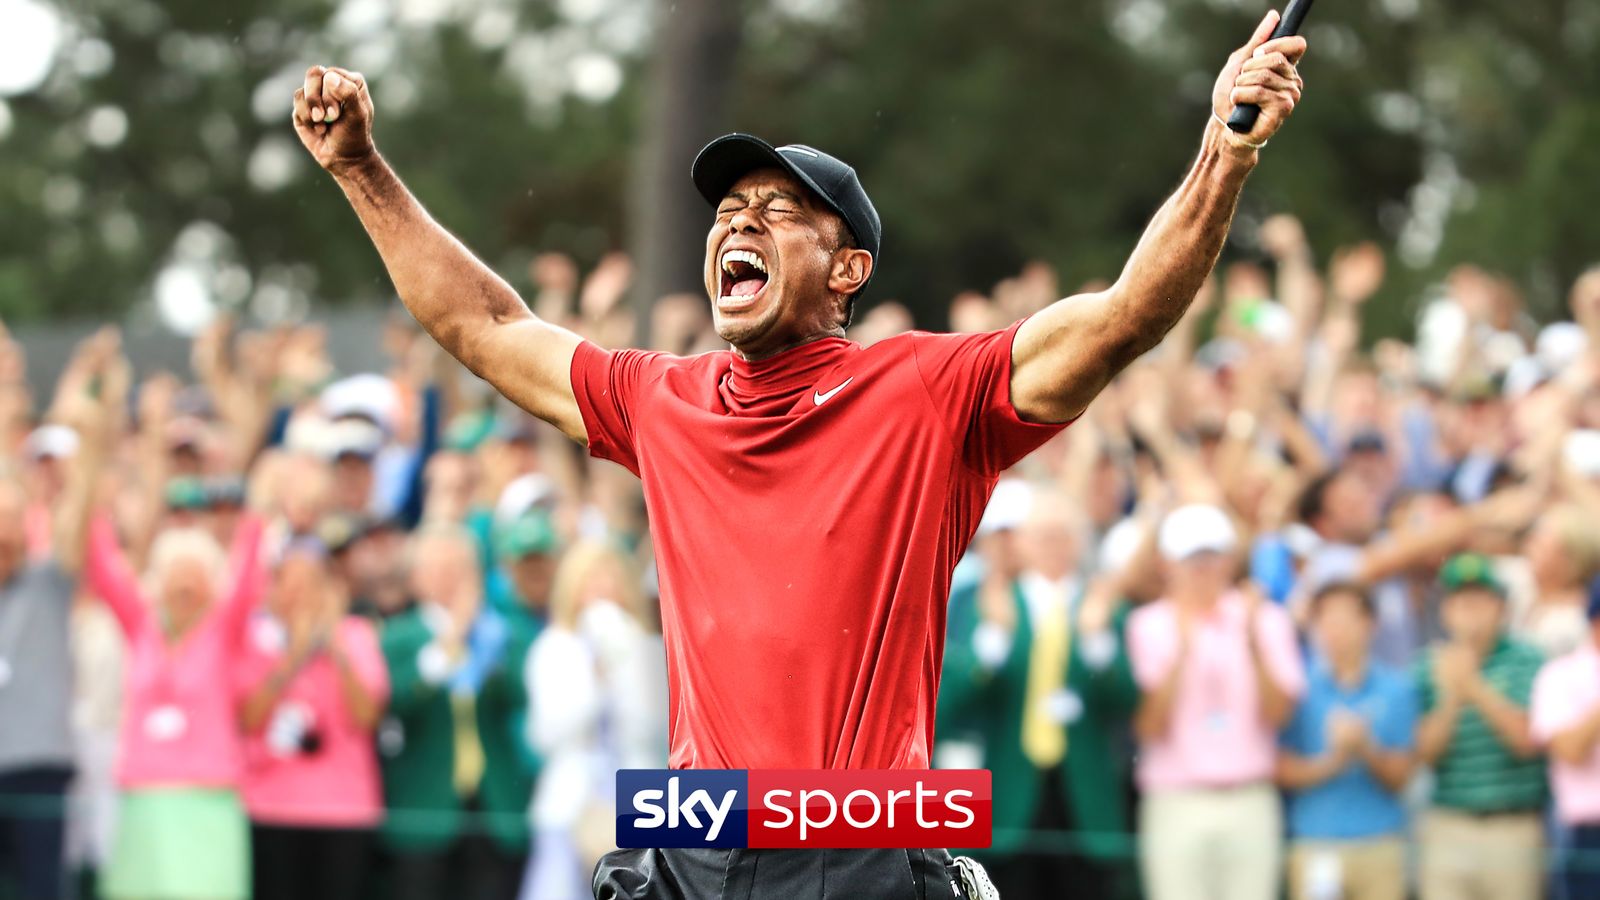 Sky Sports exclusive live broadcaster of the Masters in the UK